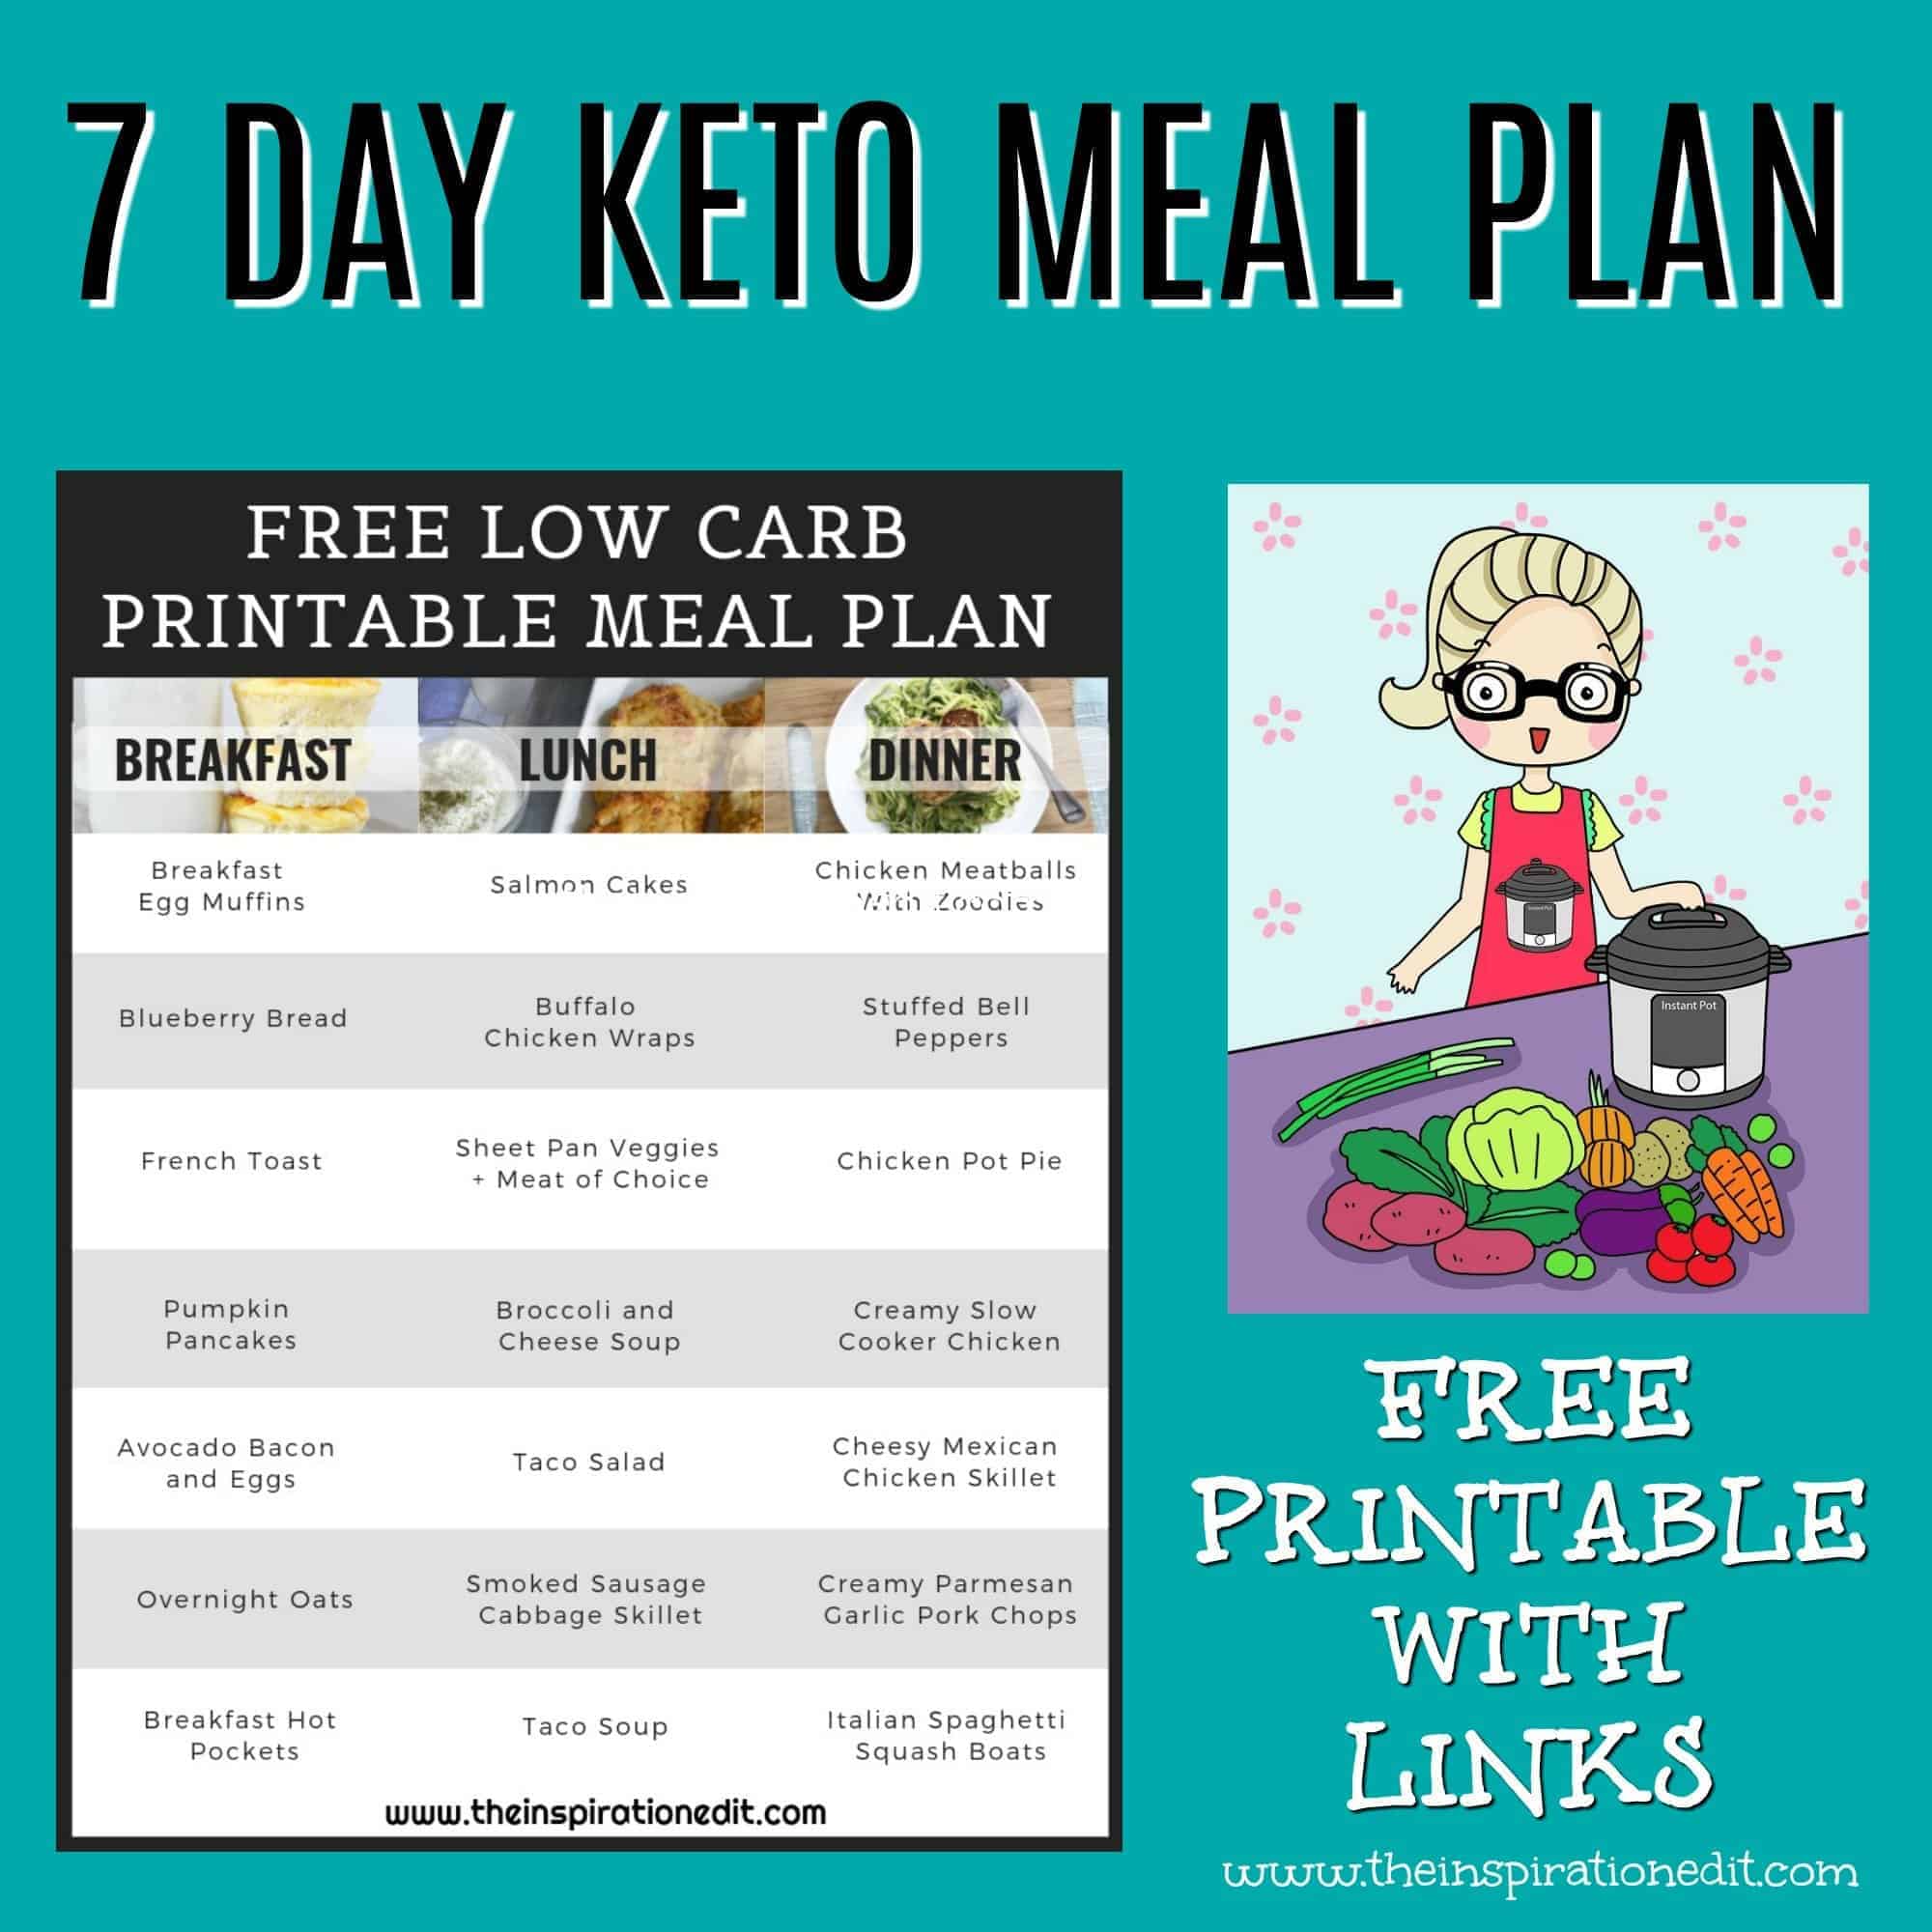 use-this-printable-keto-diet-meal-plan-to-help-you-get-started-on-the